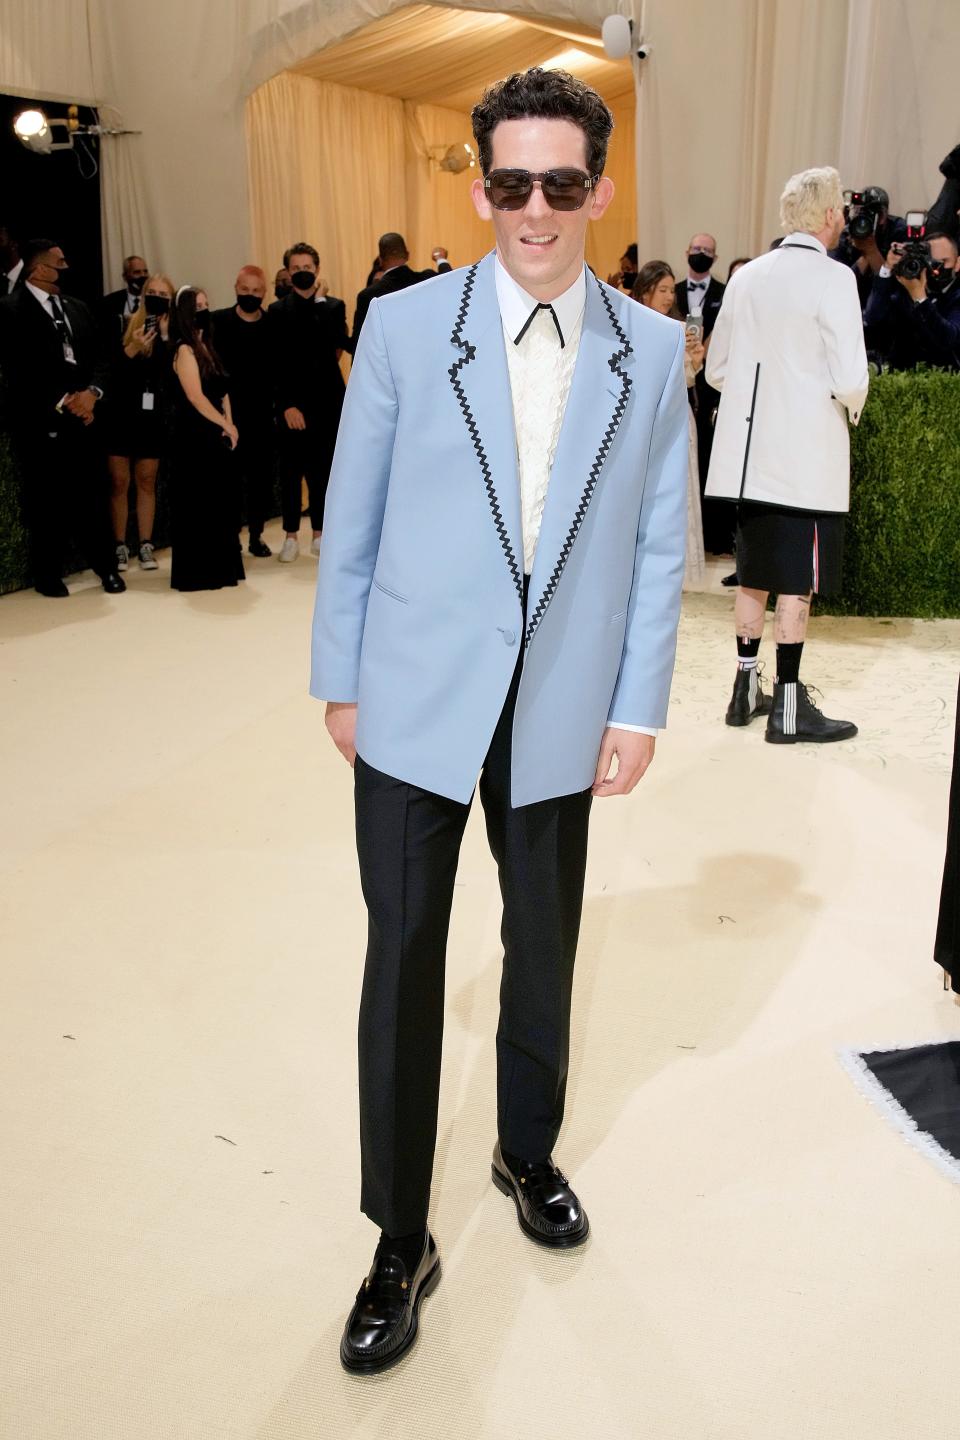 Josh O'Connor in a blue tuxedo jacket at the Met Gala in 2021.